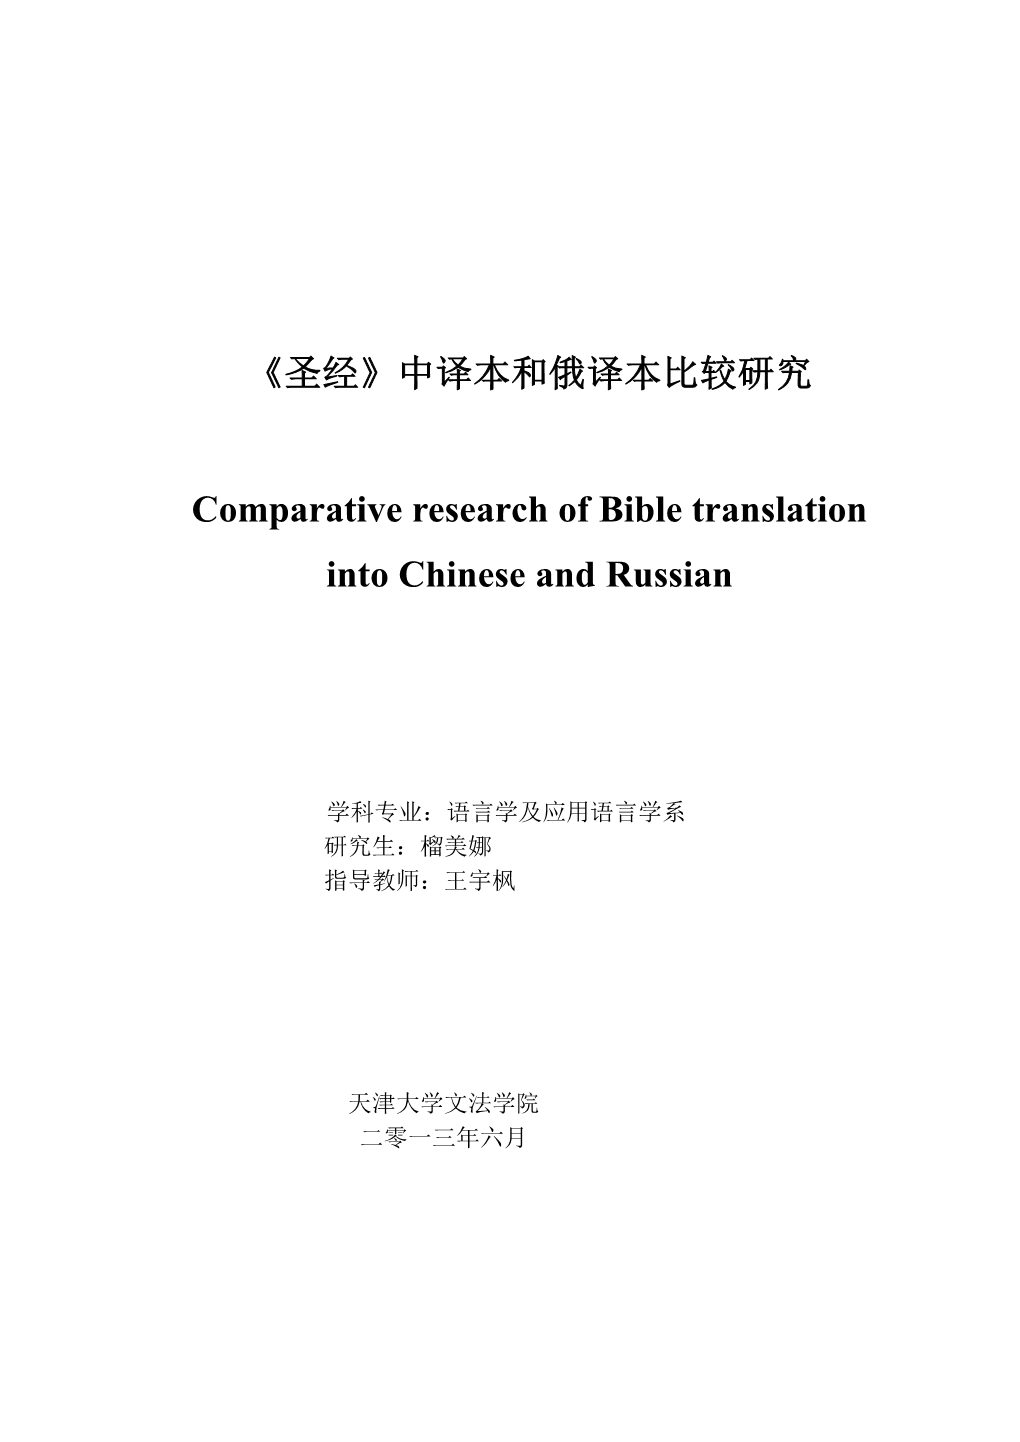 Comparative Research of Bible Translation Into Chinese and Russian